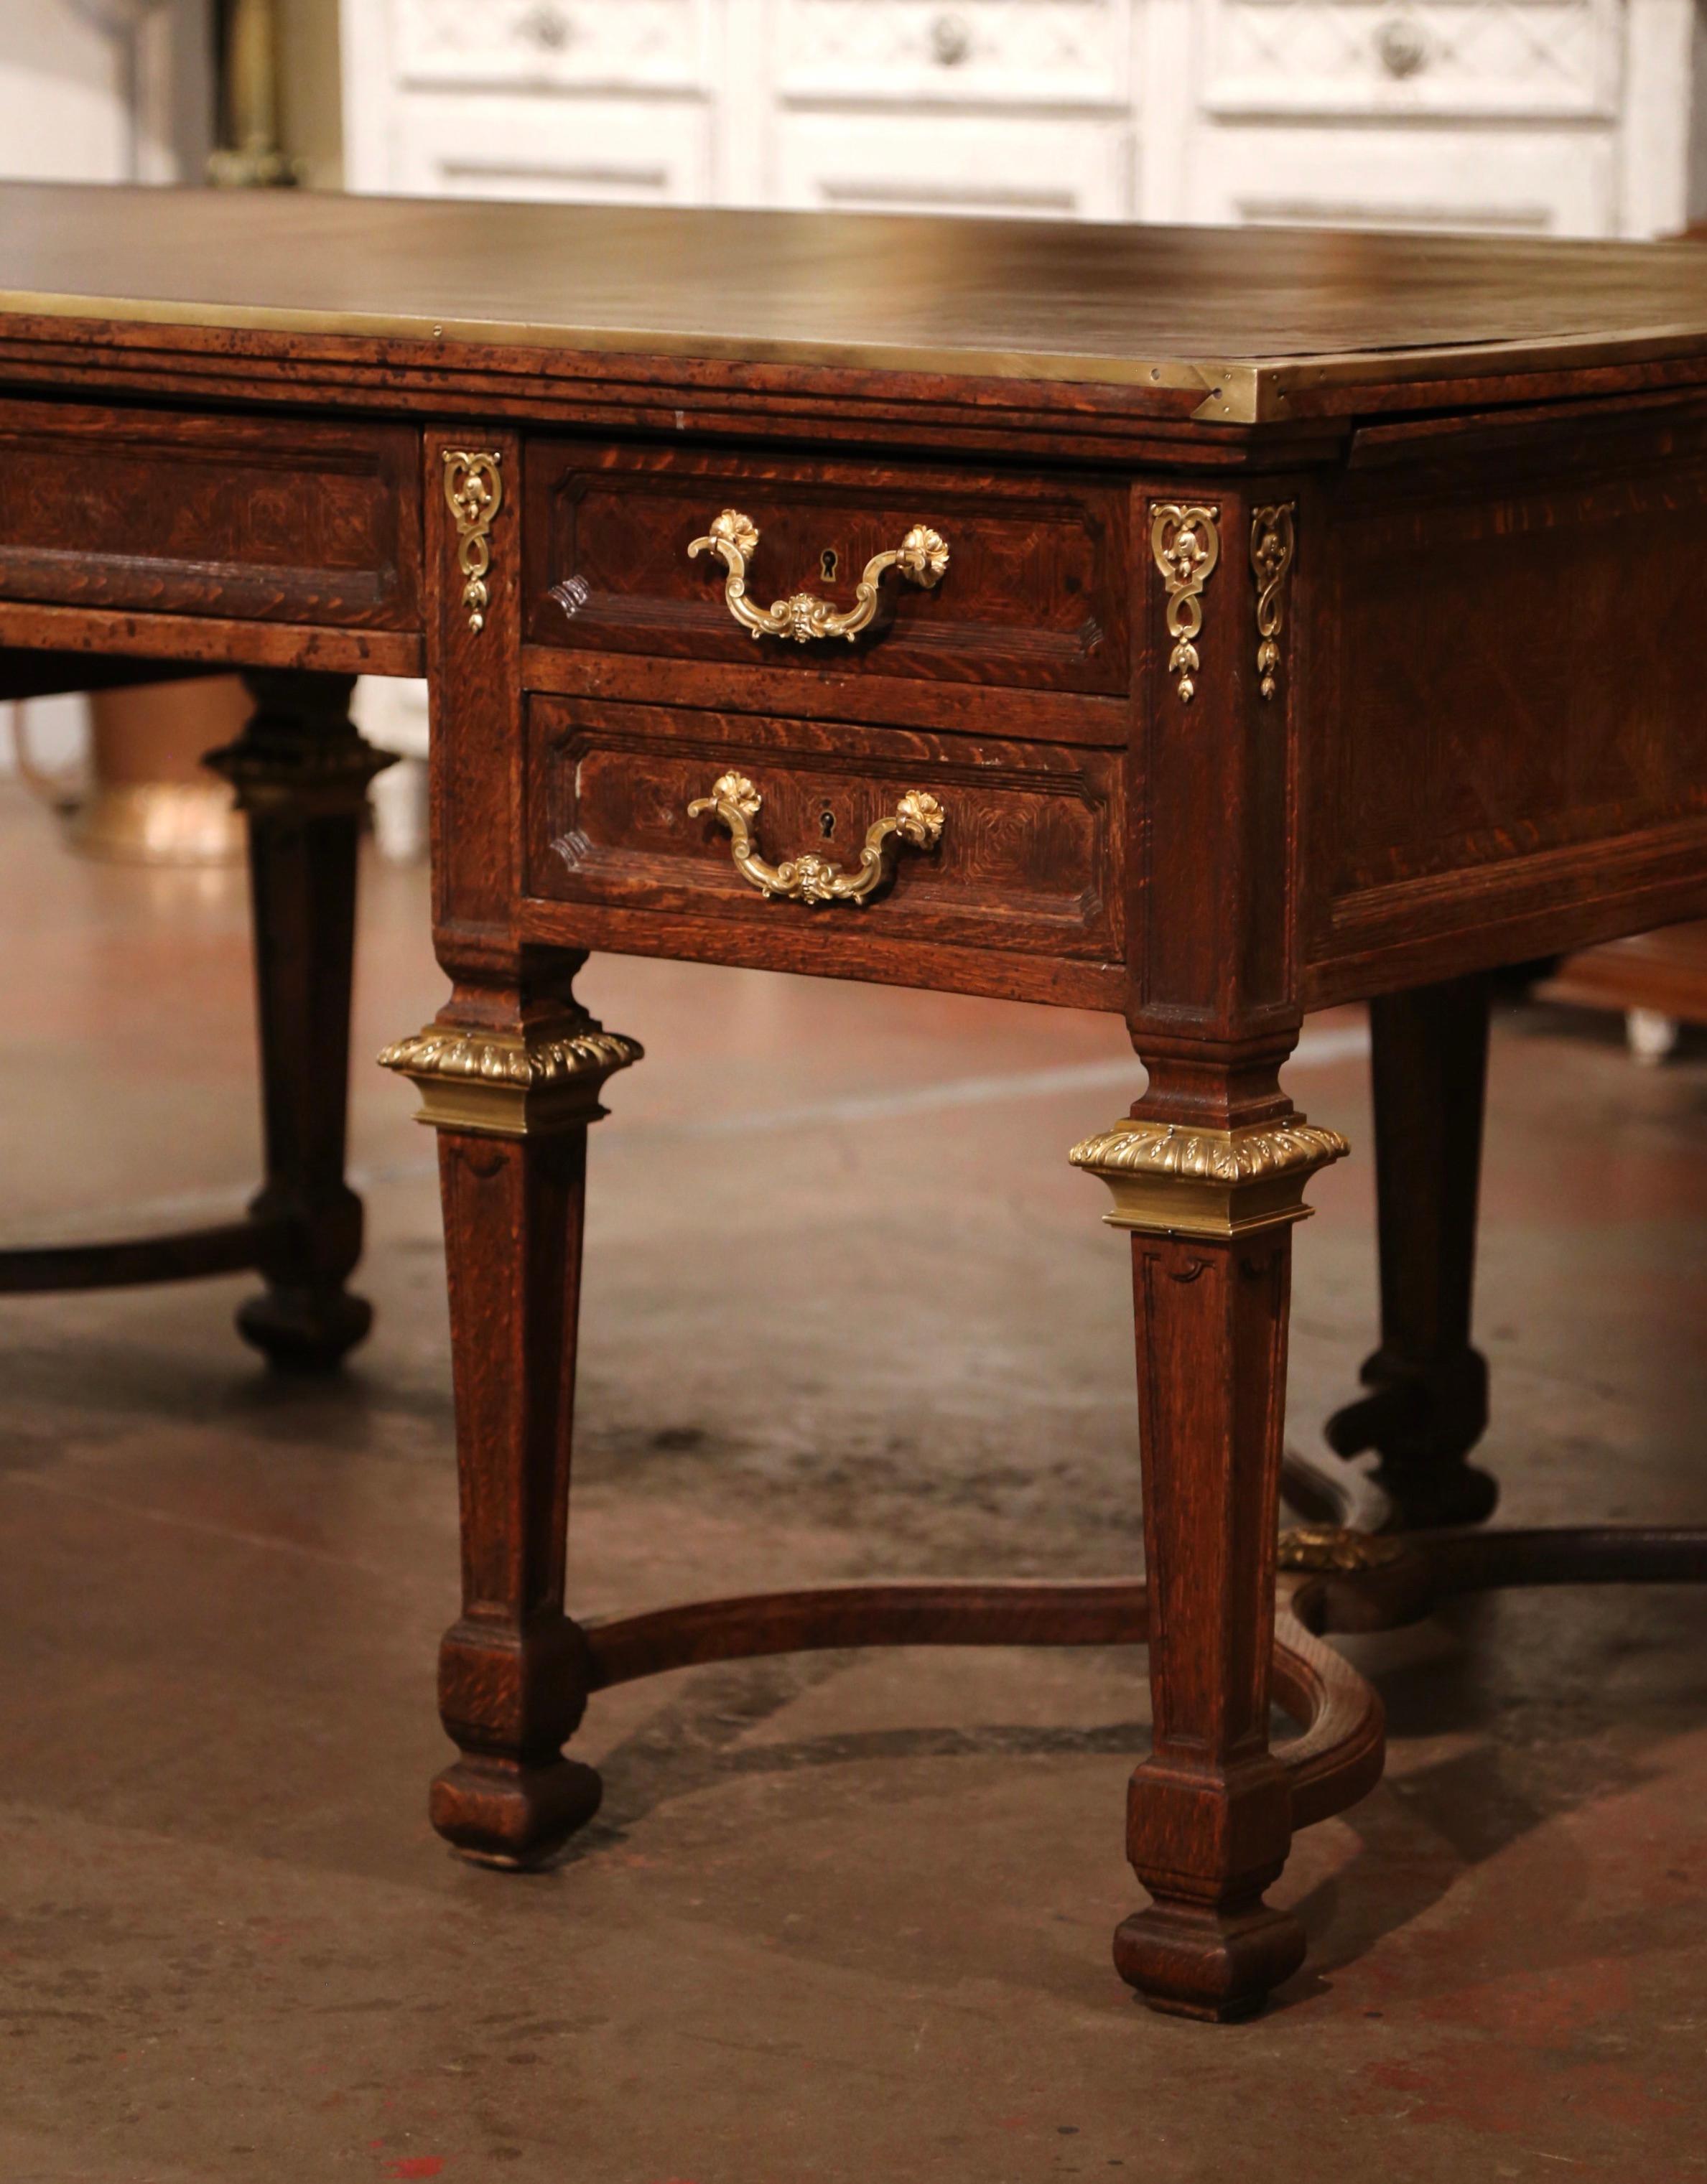 This elegant antique oak desk was crafted in northern France circa 1840. Standing on eight squared and tapered legs decorated with bronze mounts at the shoulder, and connected with double X stretcher at the base, the large writing table is decorated